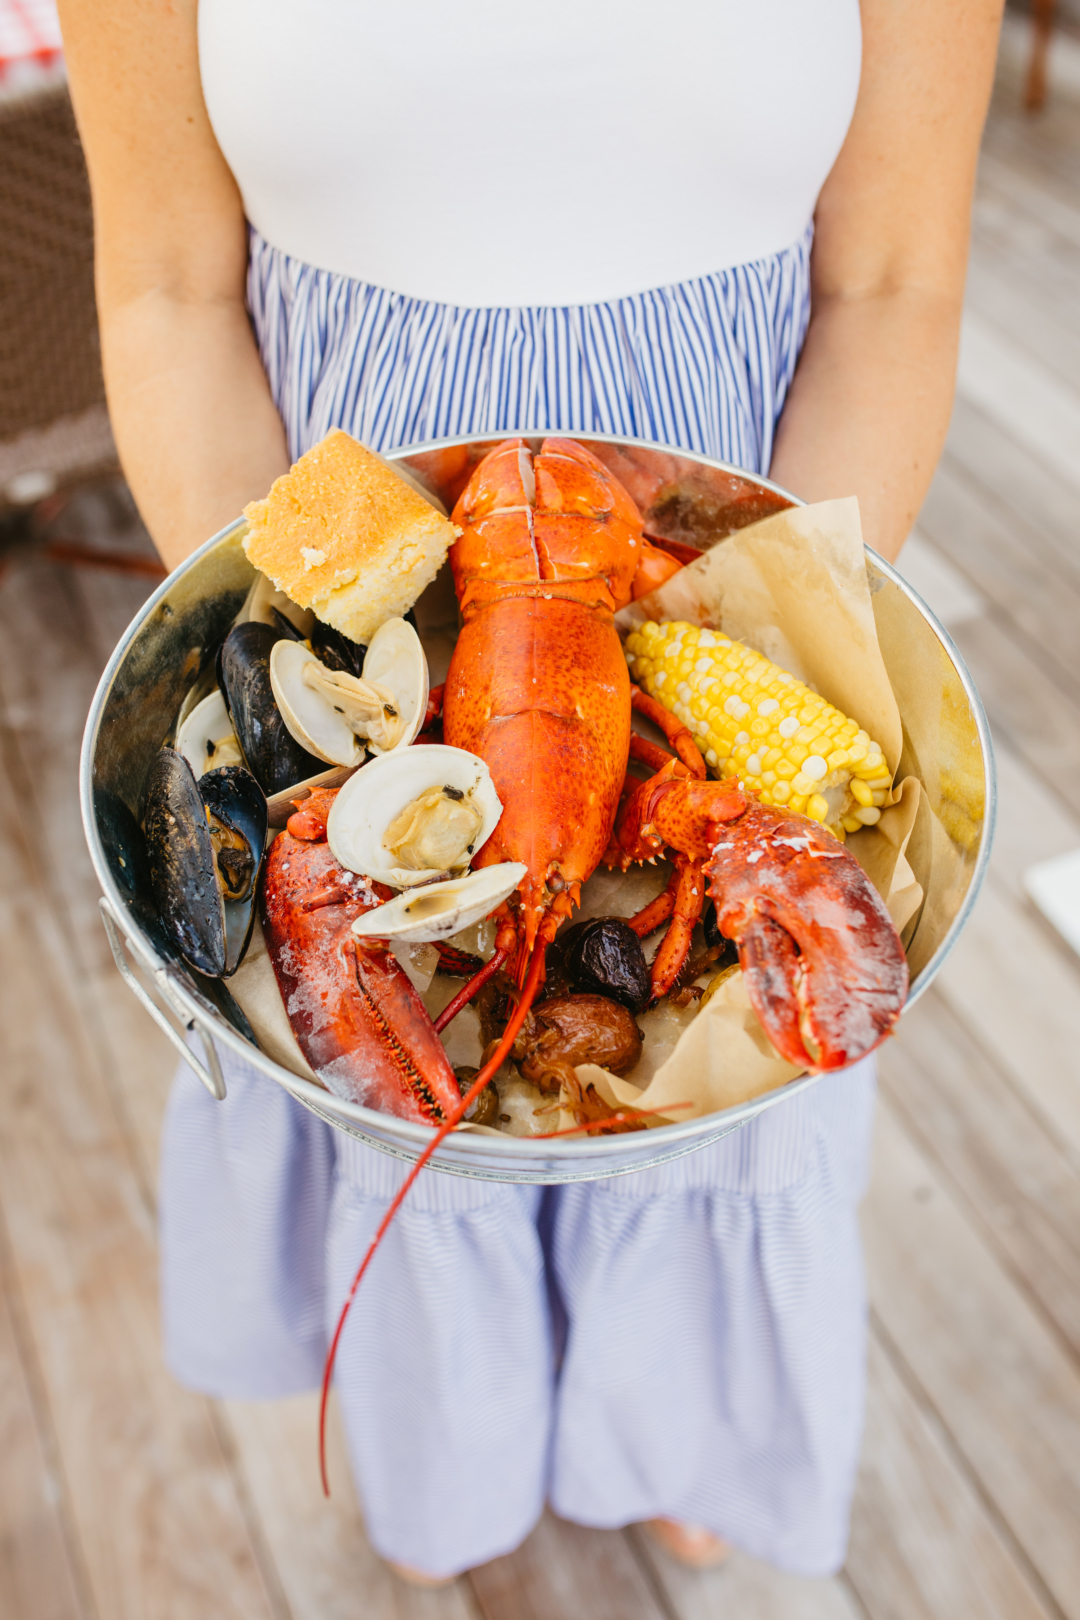 Travel: The Nantucket Hotel Clambake with Palm Beach Lately